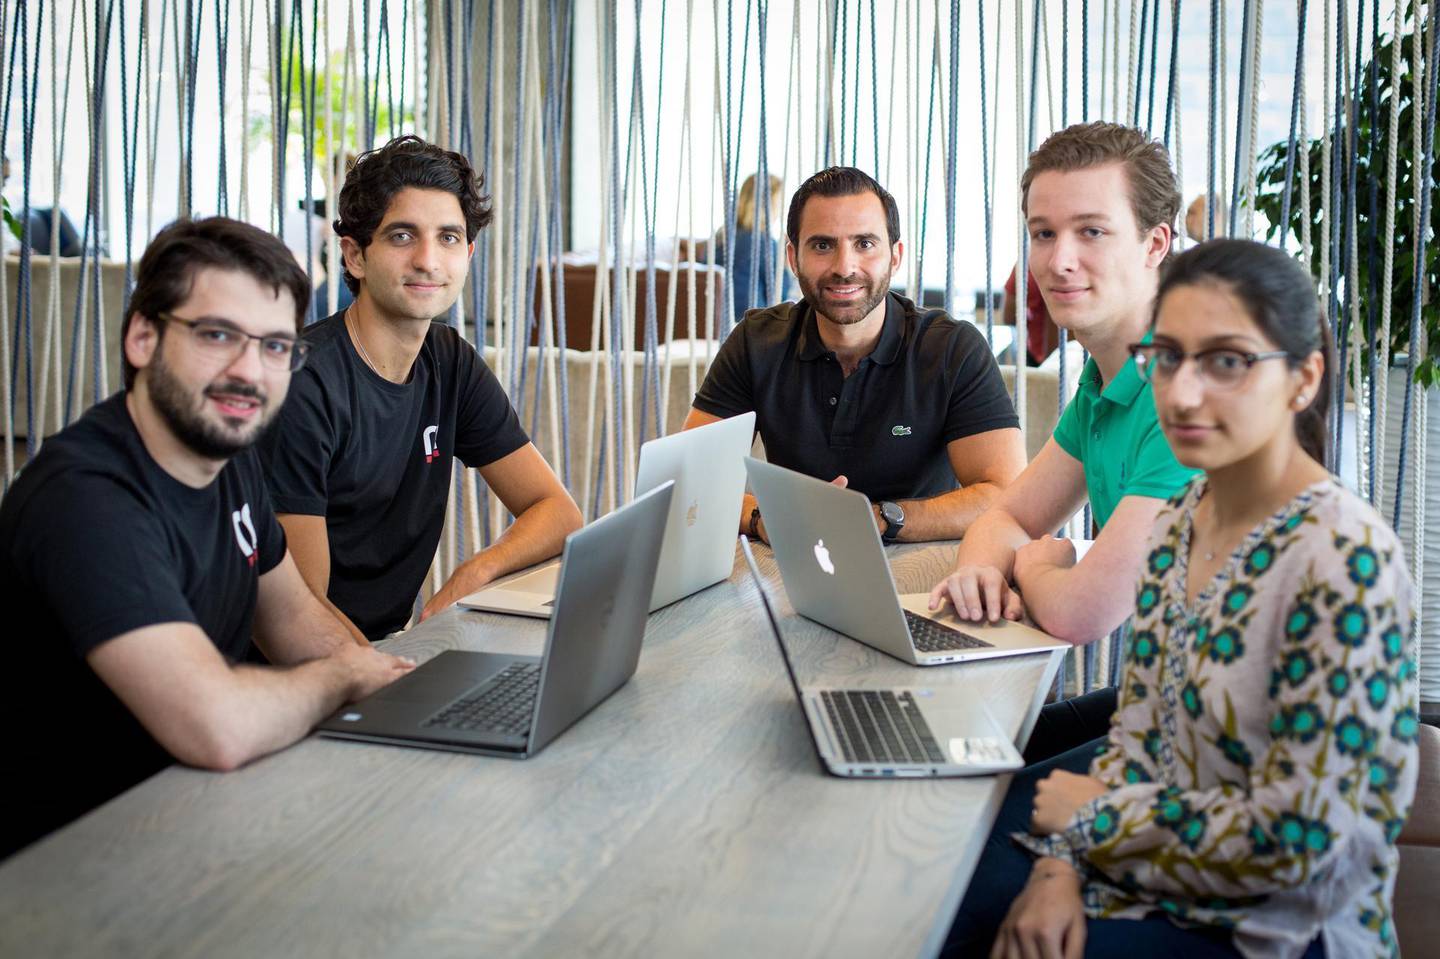 Philip Bahoshy (centre) with his team at Magnitt. The entrepreneur plans to hire new tech experts to help grow the platform. Photo: Magnitt